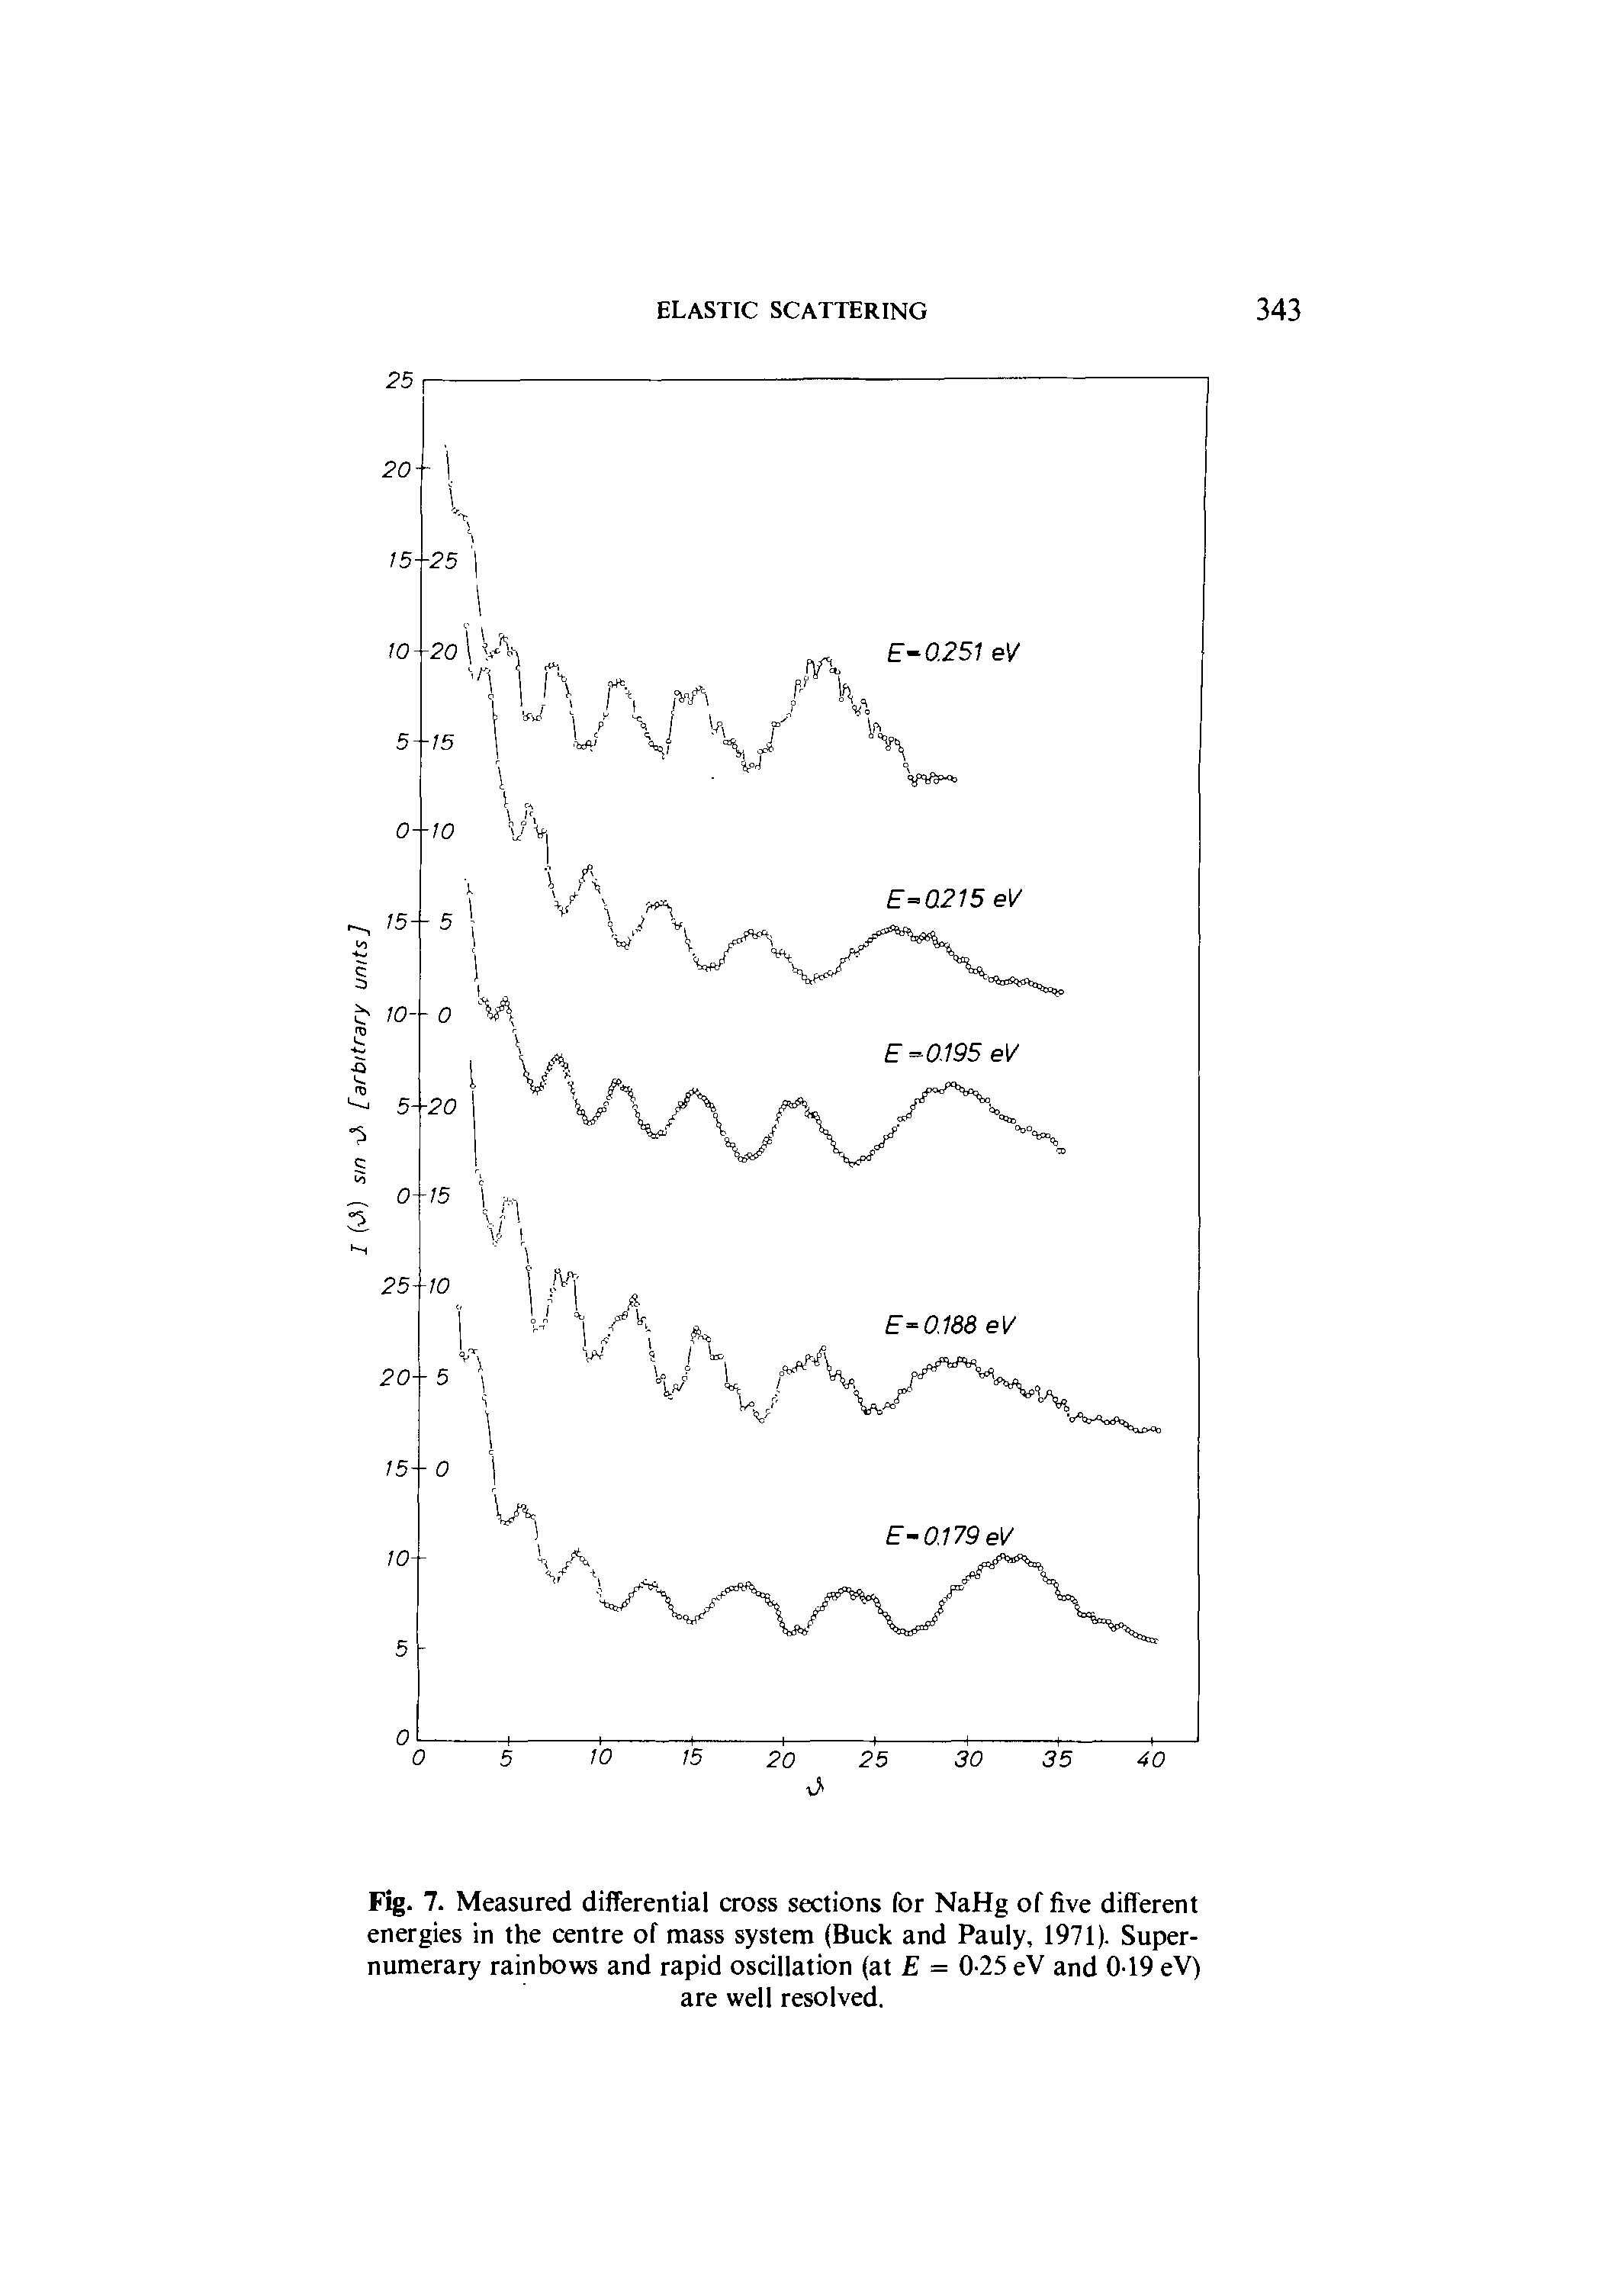 Fig. 7. Measured differential cross sections for NaHg of five different energies in the centre of mass system (Buck and Pauly, 1971). Supernumerary rainbows and rapid oscillation (at E = 0-25 eV and 0-19 eV) are well resolved.